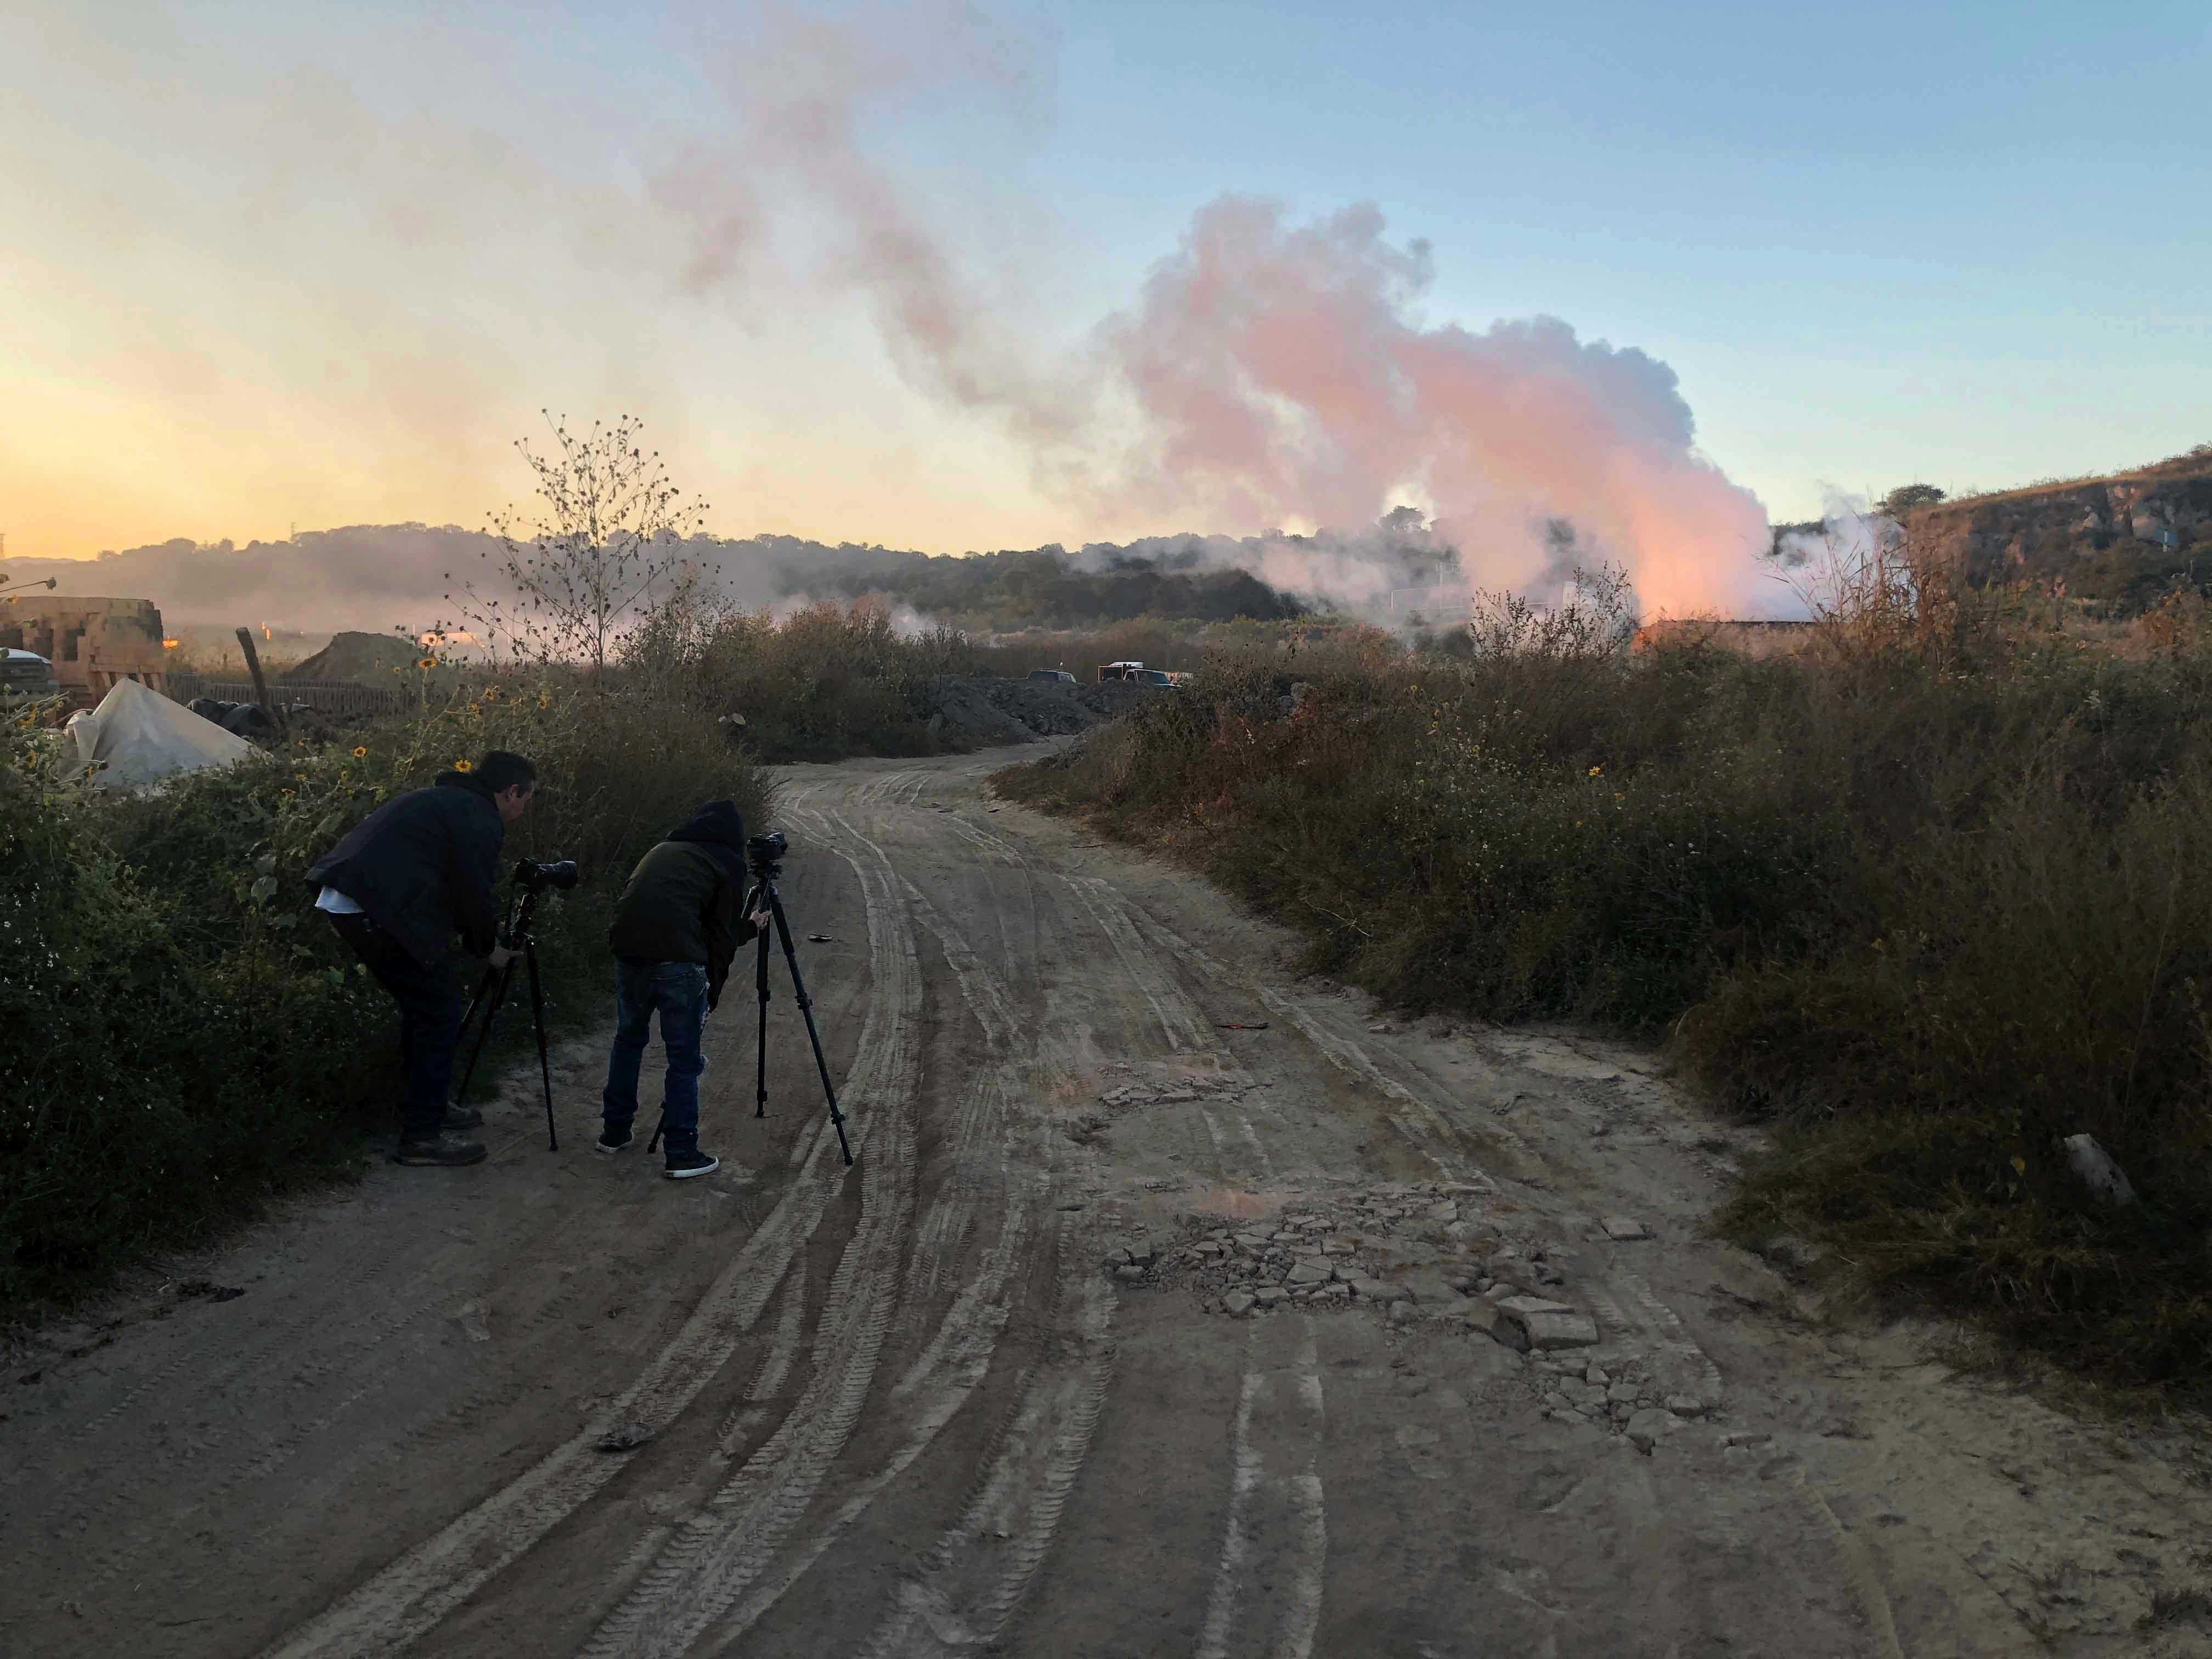 Filming the smoke rising from the kilns from the brick firing in Magdalena.